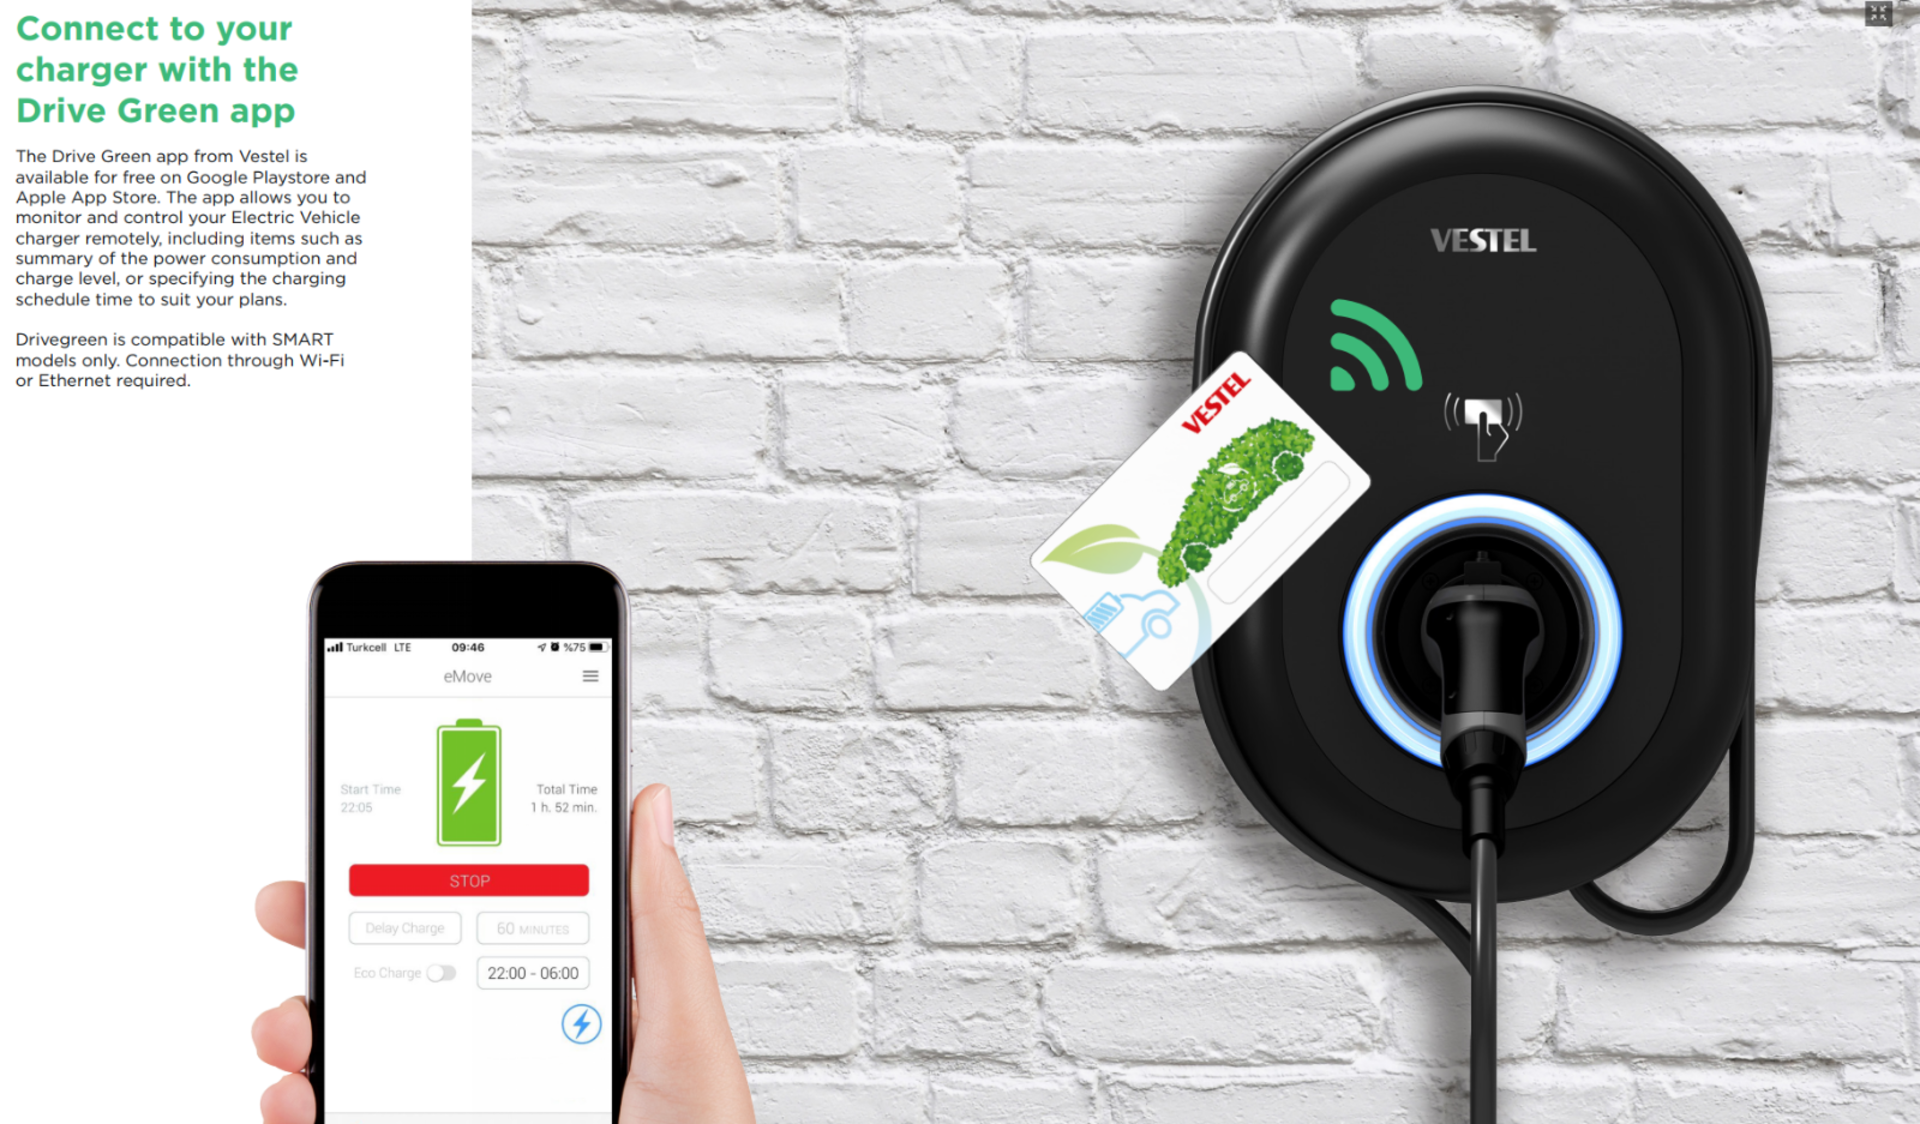 Vestel electric vehicle charger - Image 5 of 7